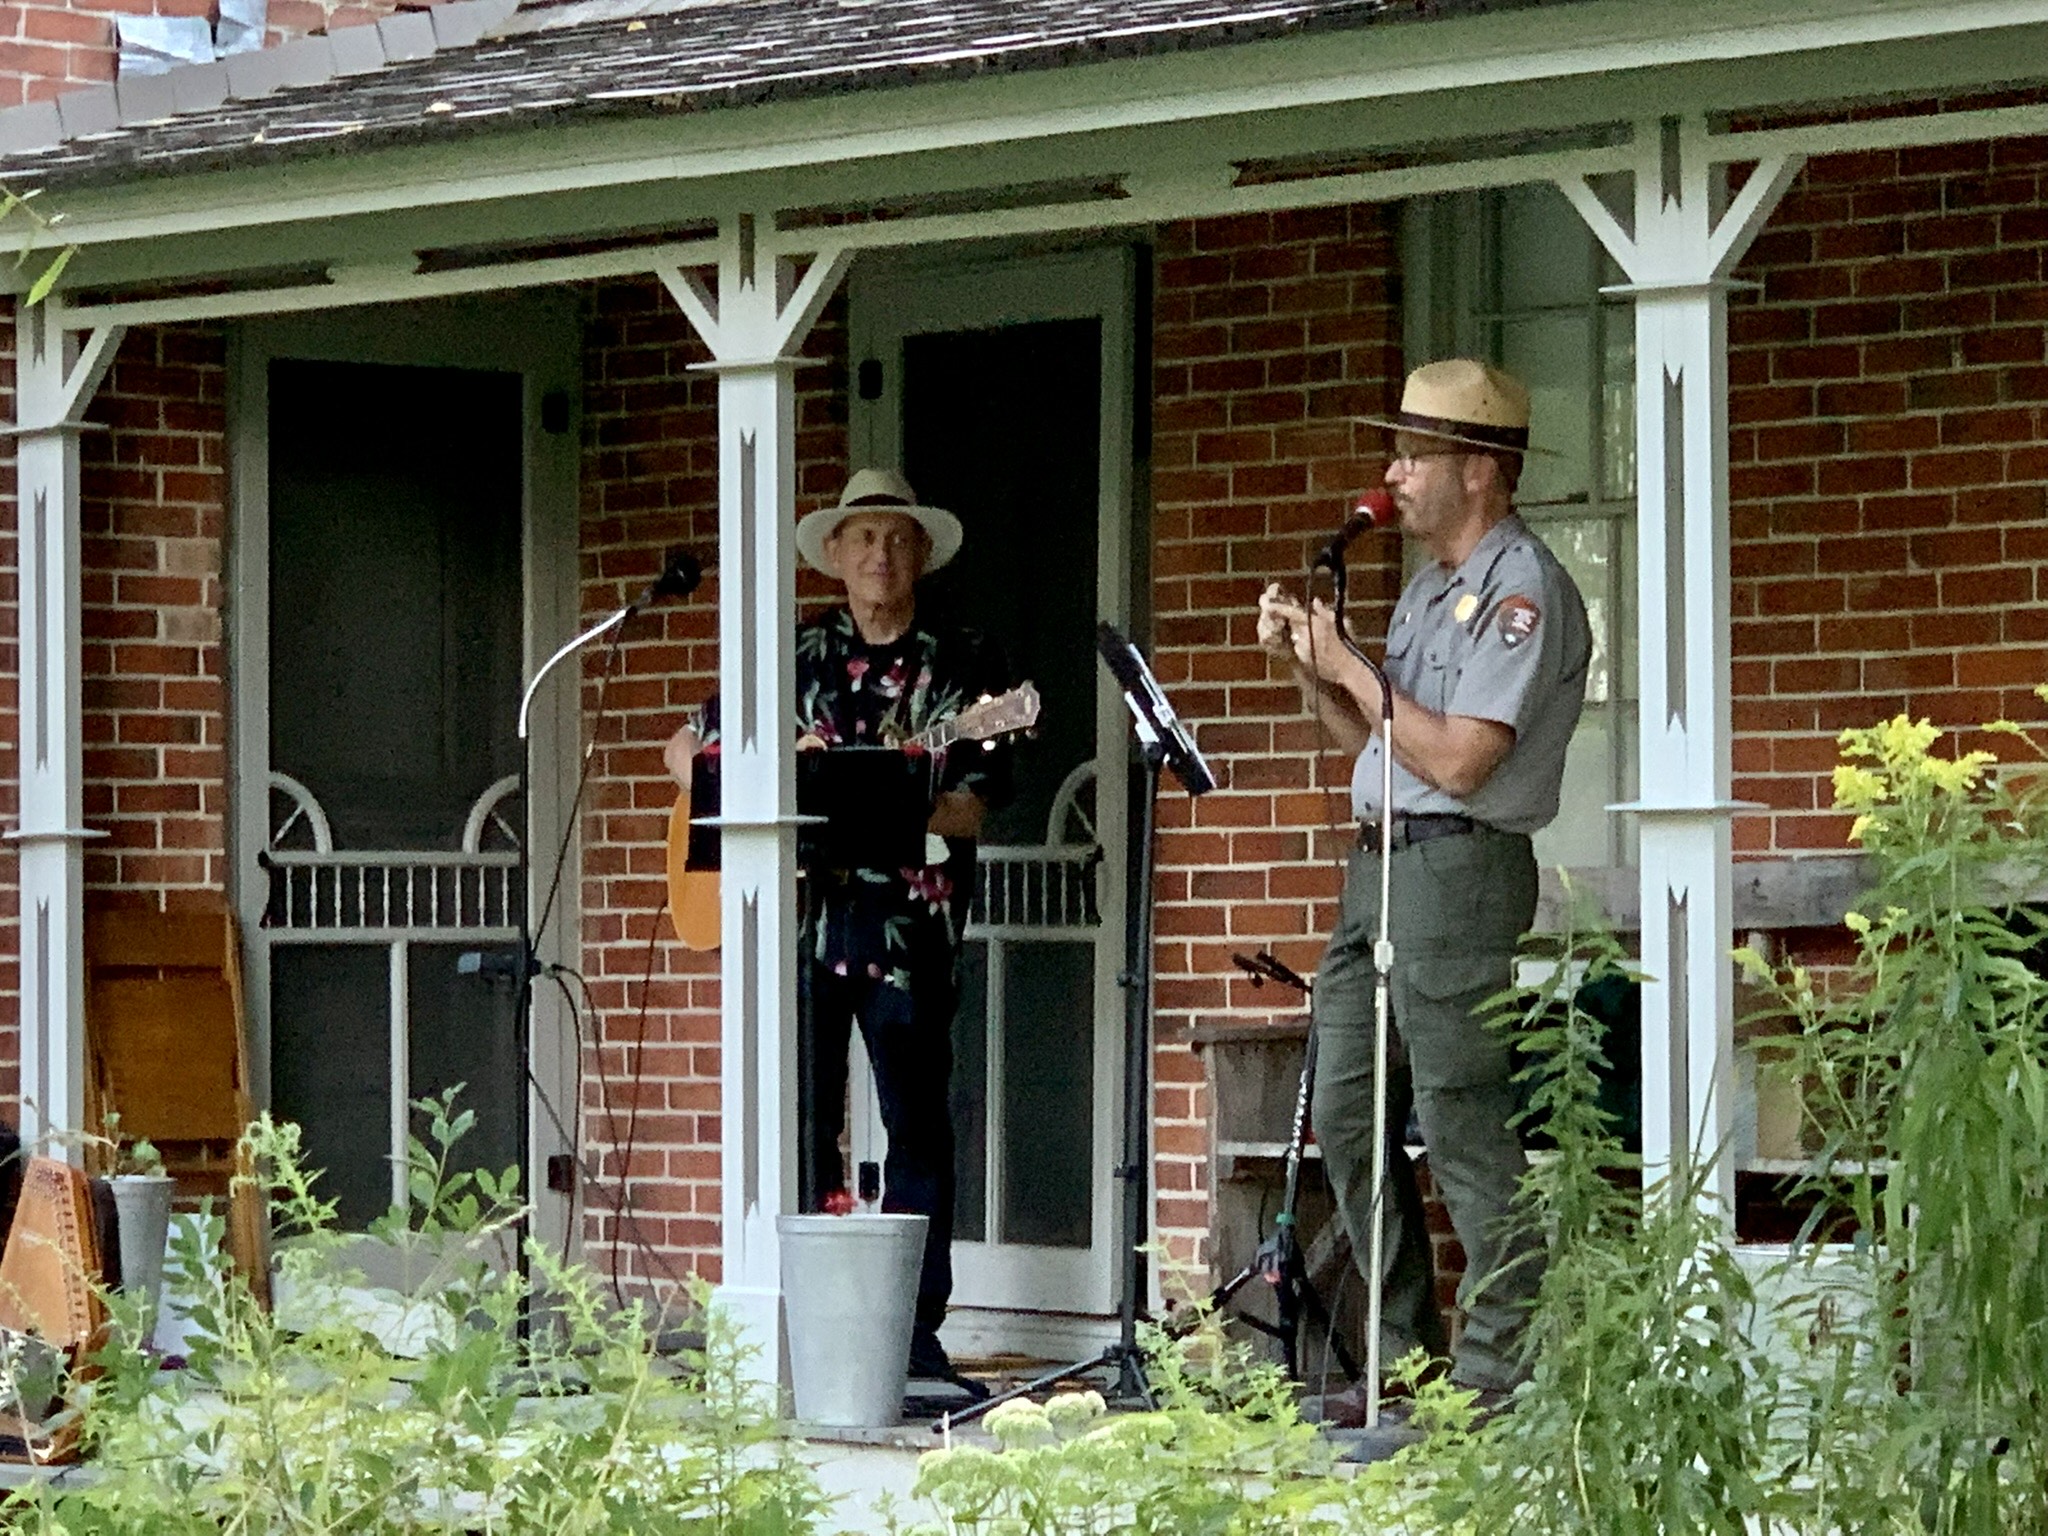 Two men on a porch playing guitar and storytelling